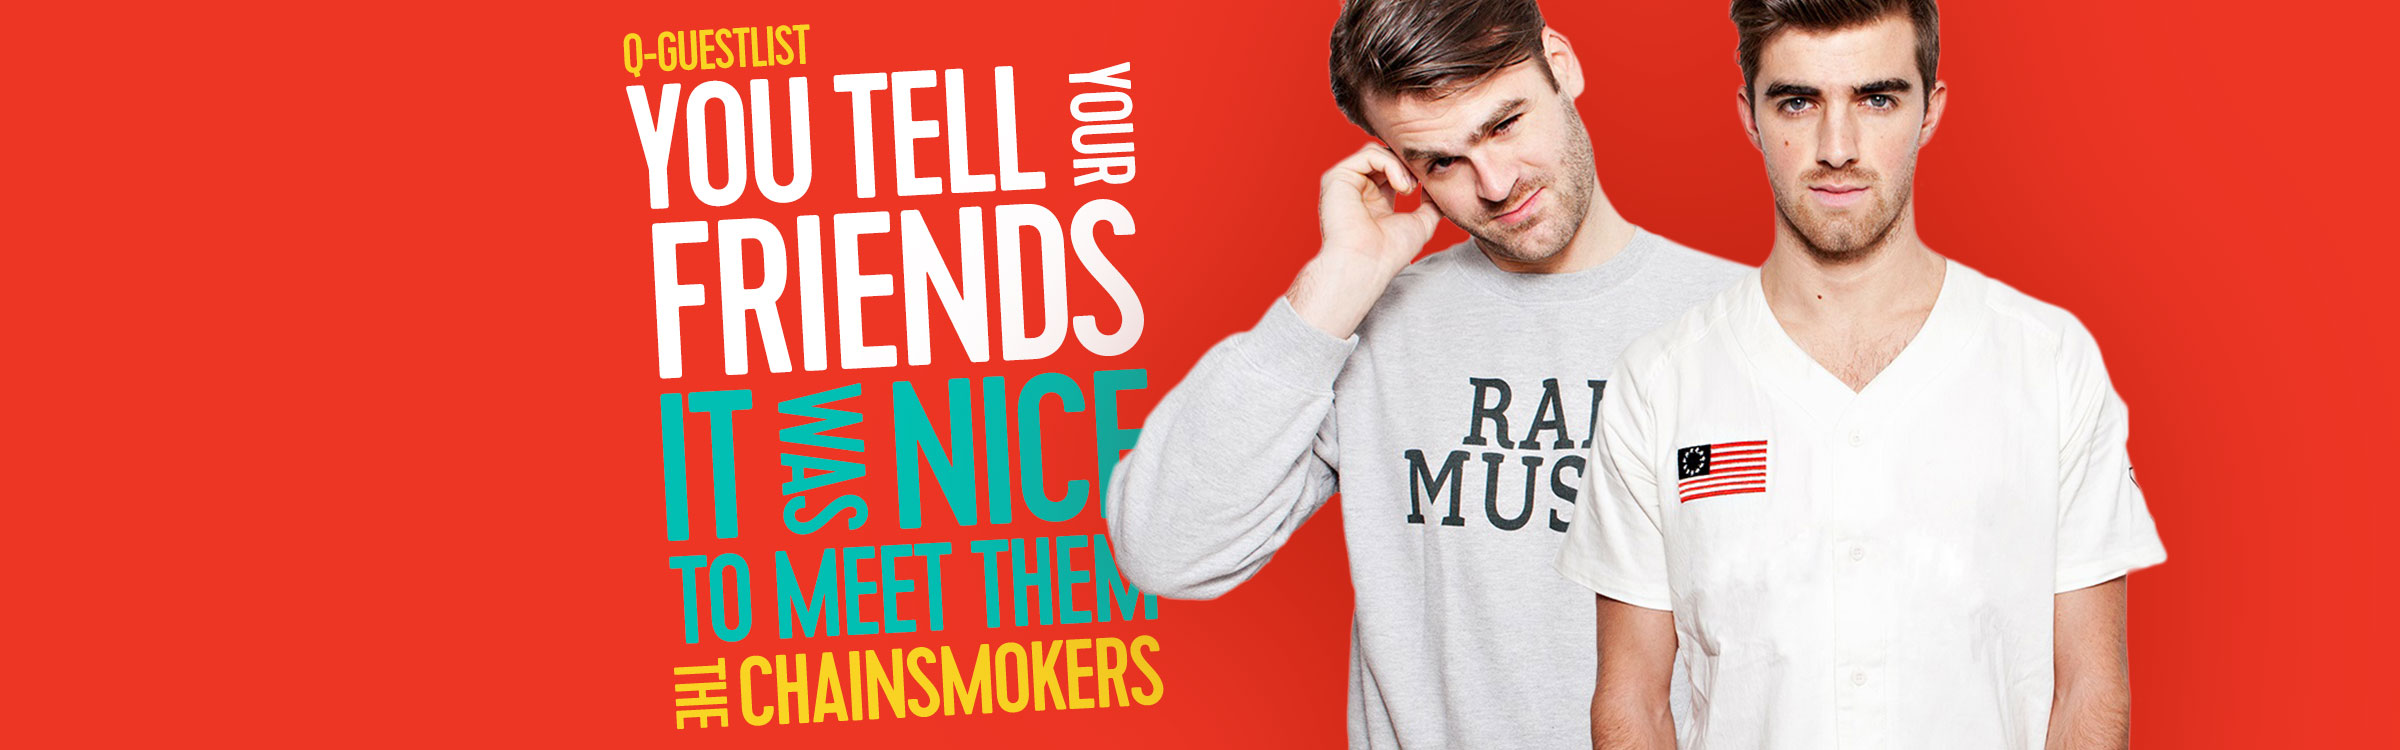 Q 2400x750 gl thechainsmokers